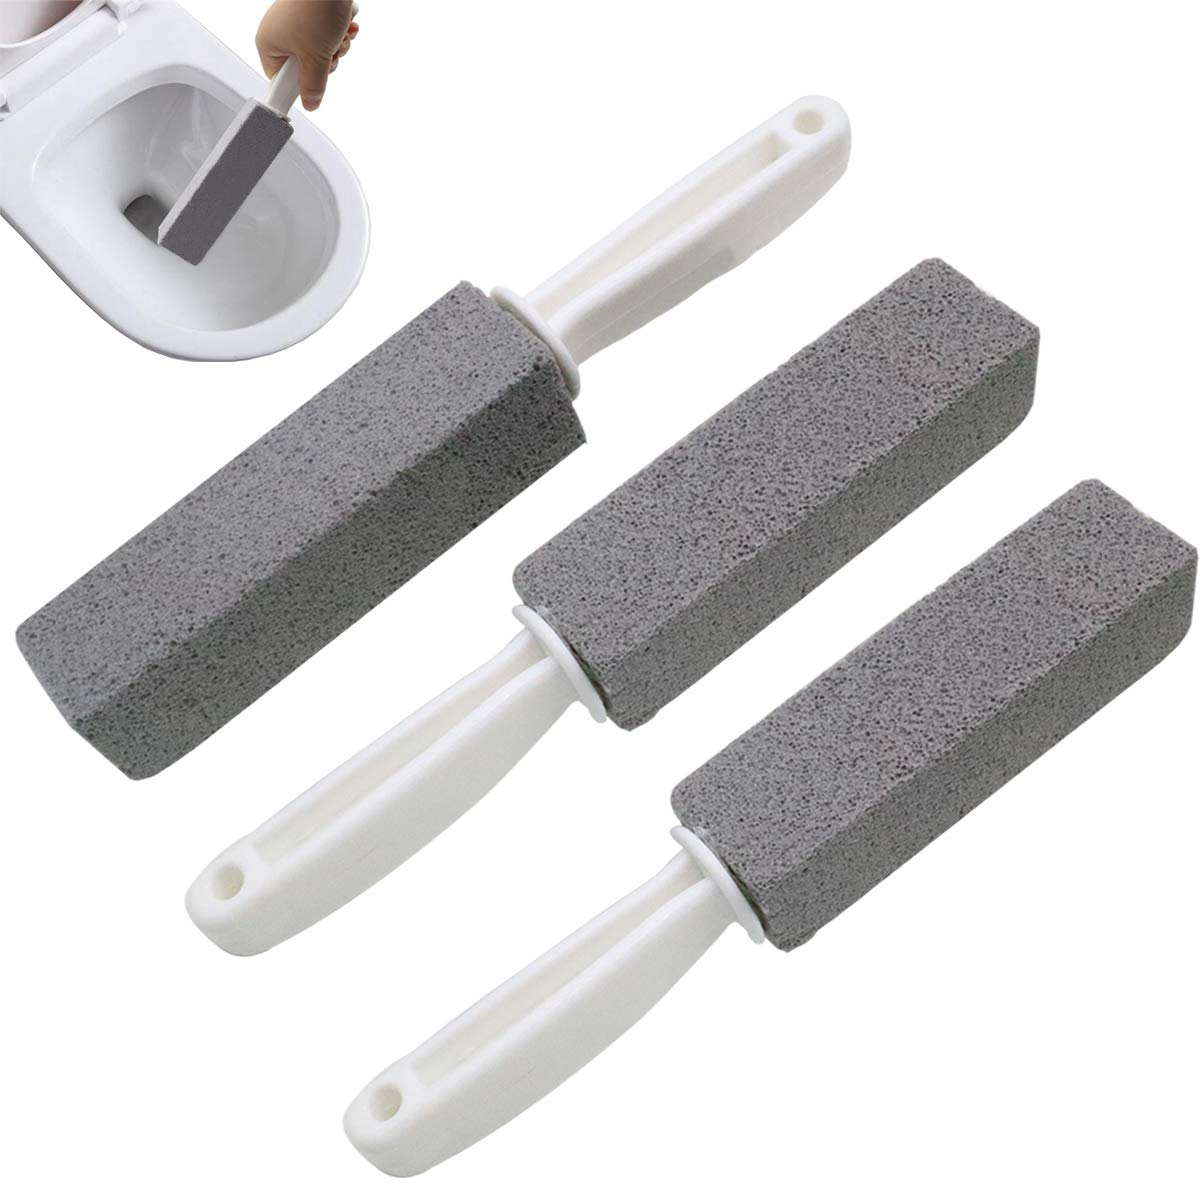 plastic handle toilet bowl ring remover pumice stick